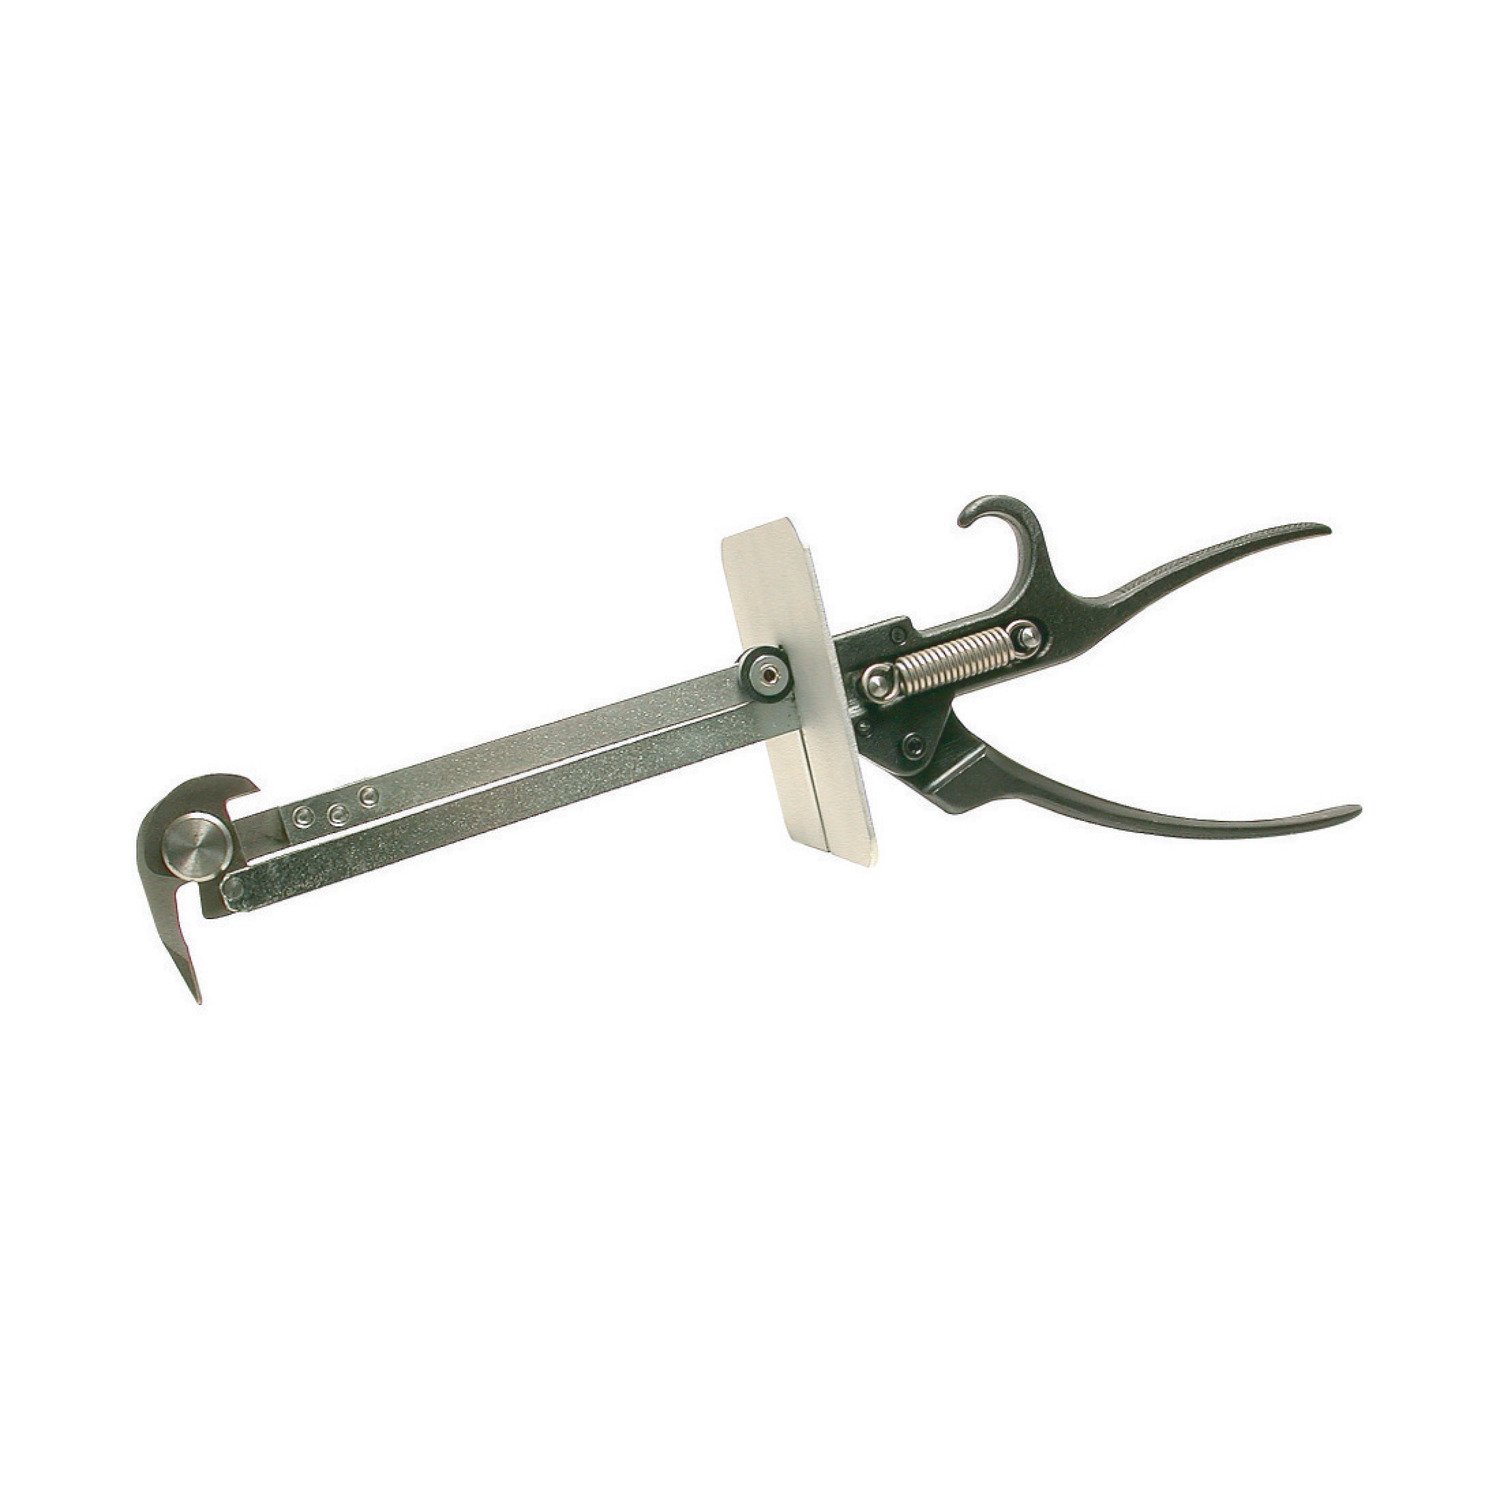 97061 - Chip Cutter and Hook